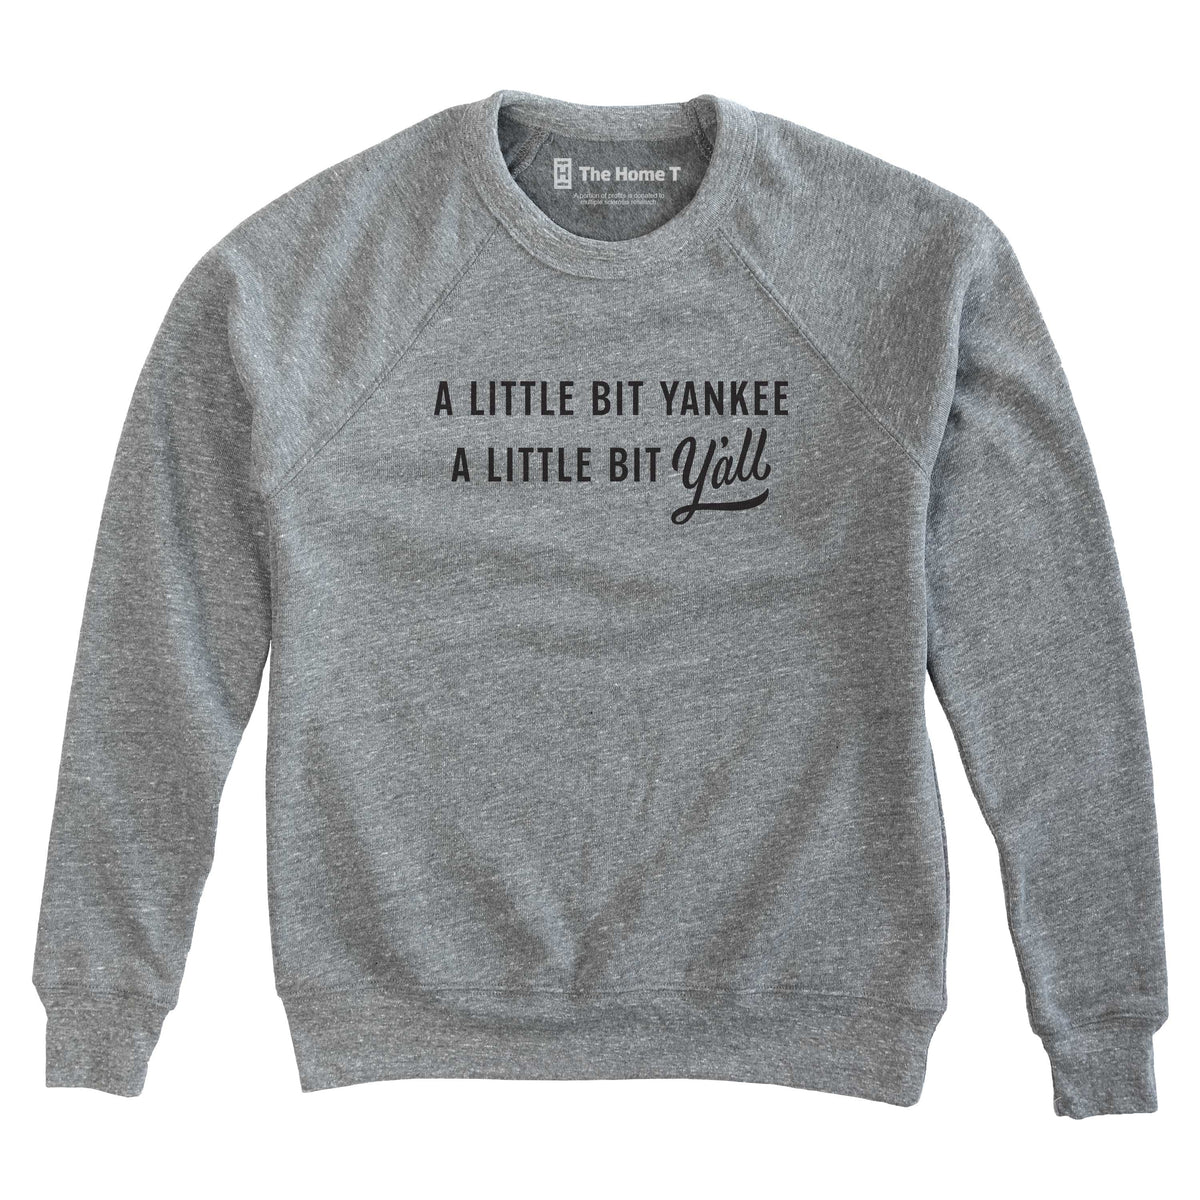 Yankee Y'all Lifestyle The Home T XS Sweatshirt